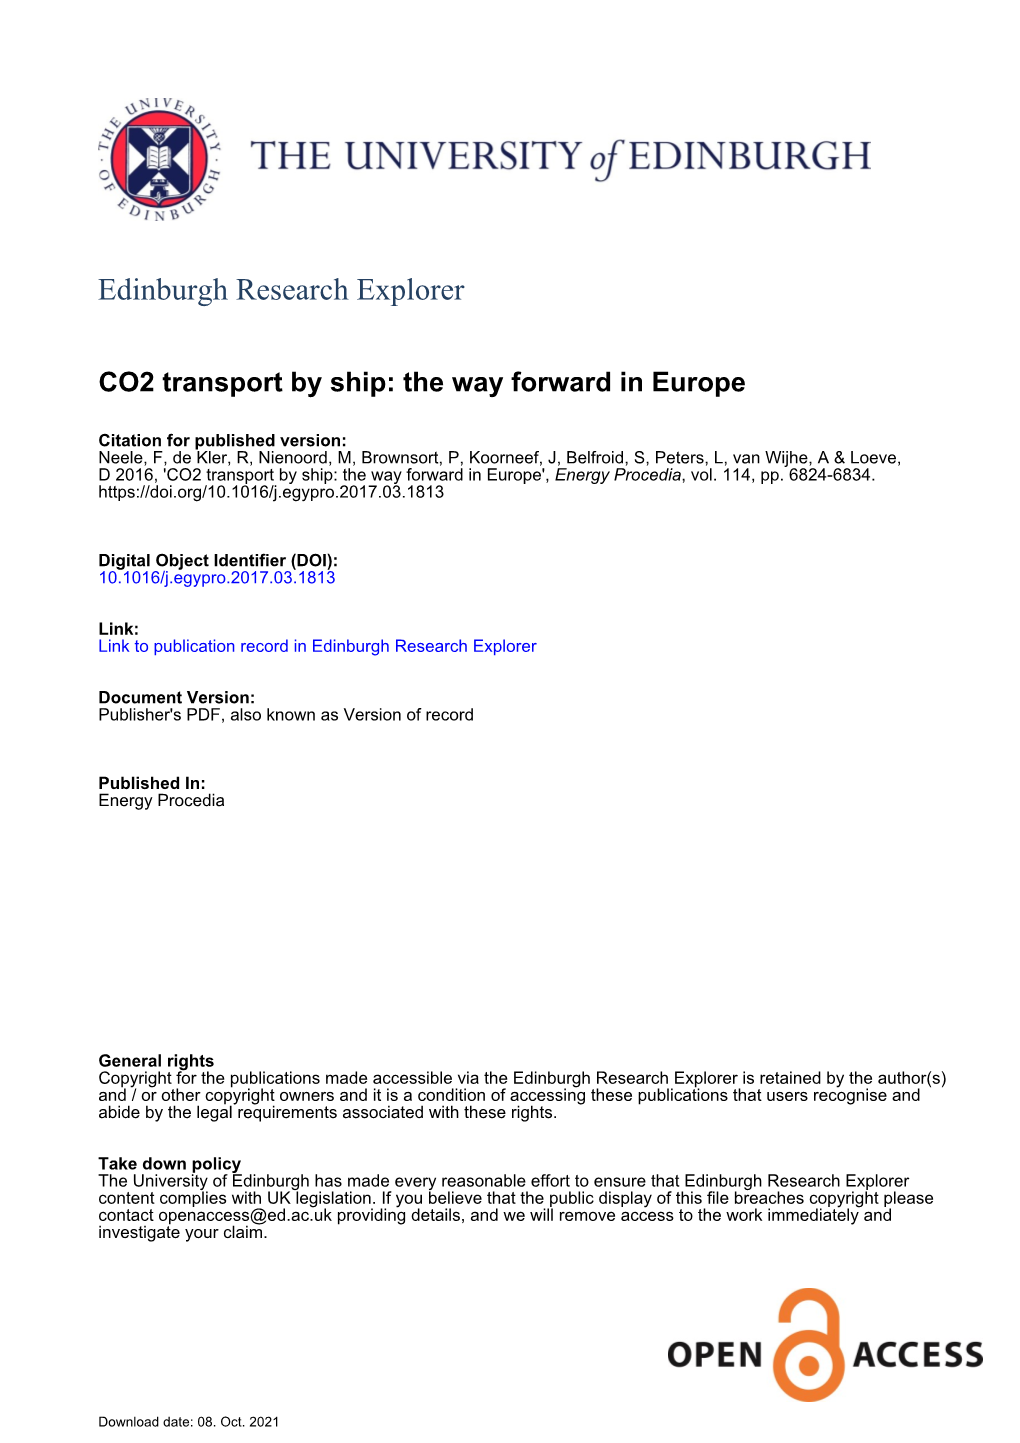 CO2 Transport by Ship: the Way Forward in Europe